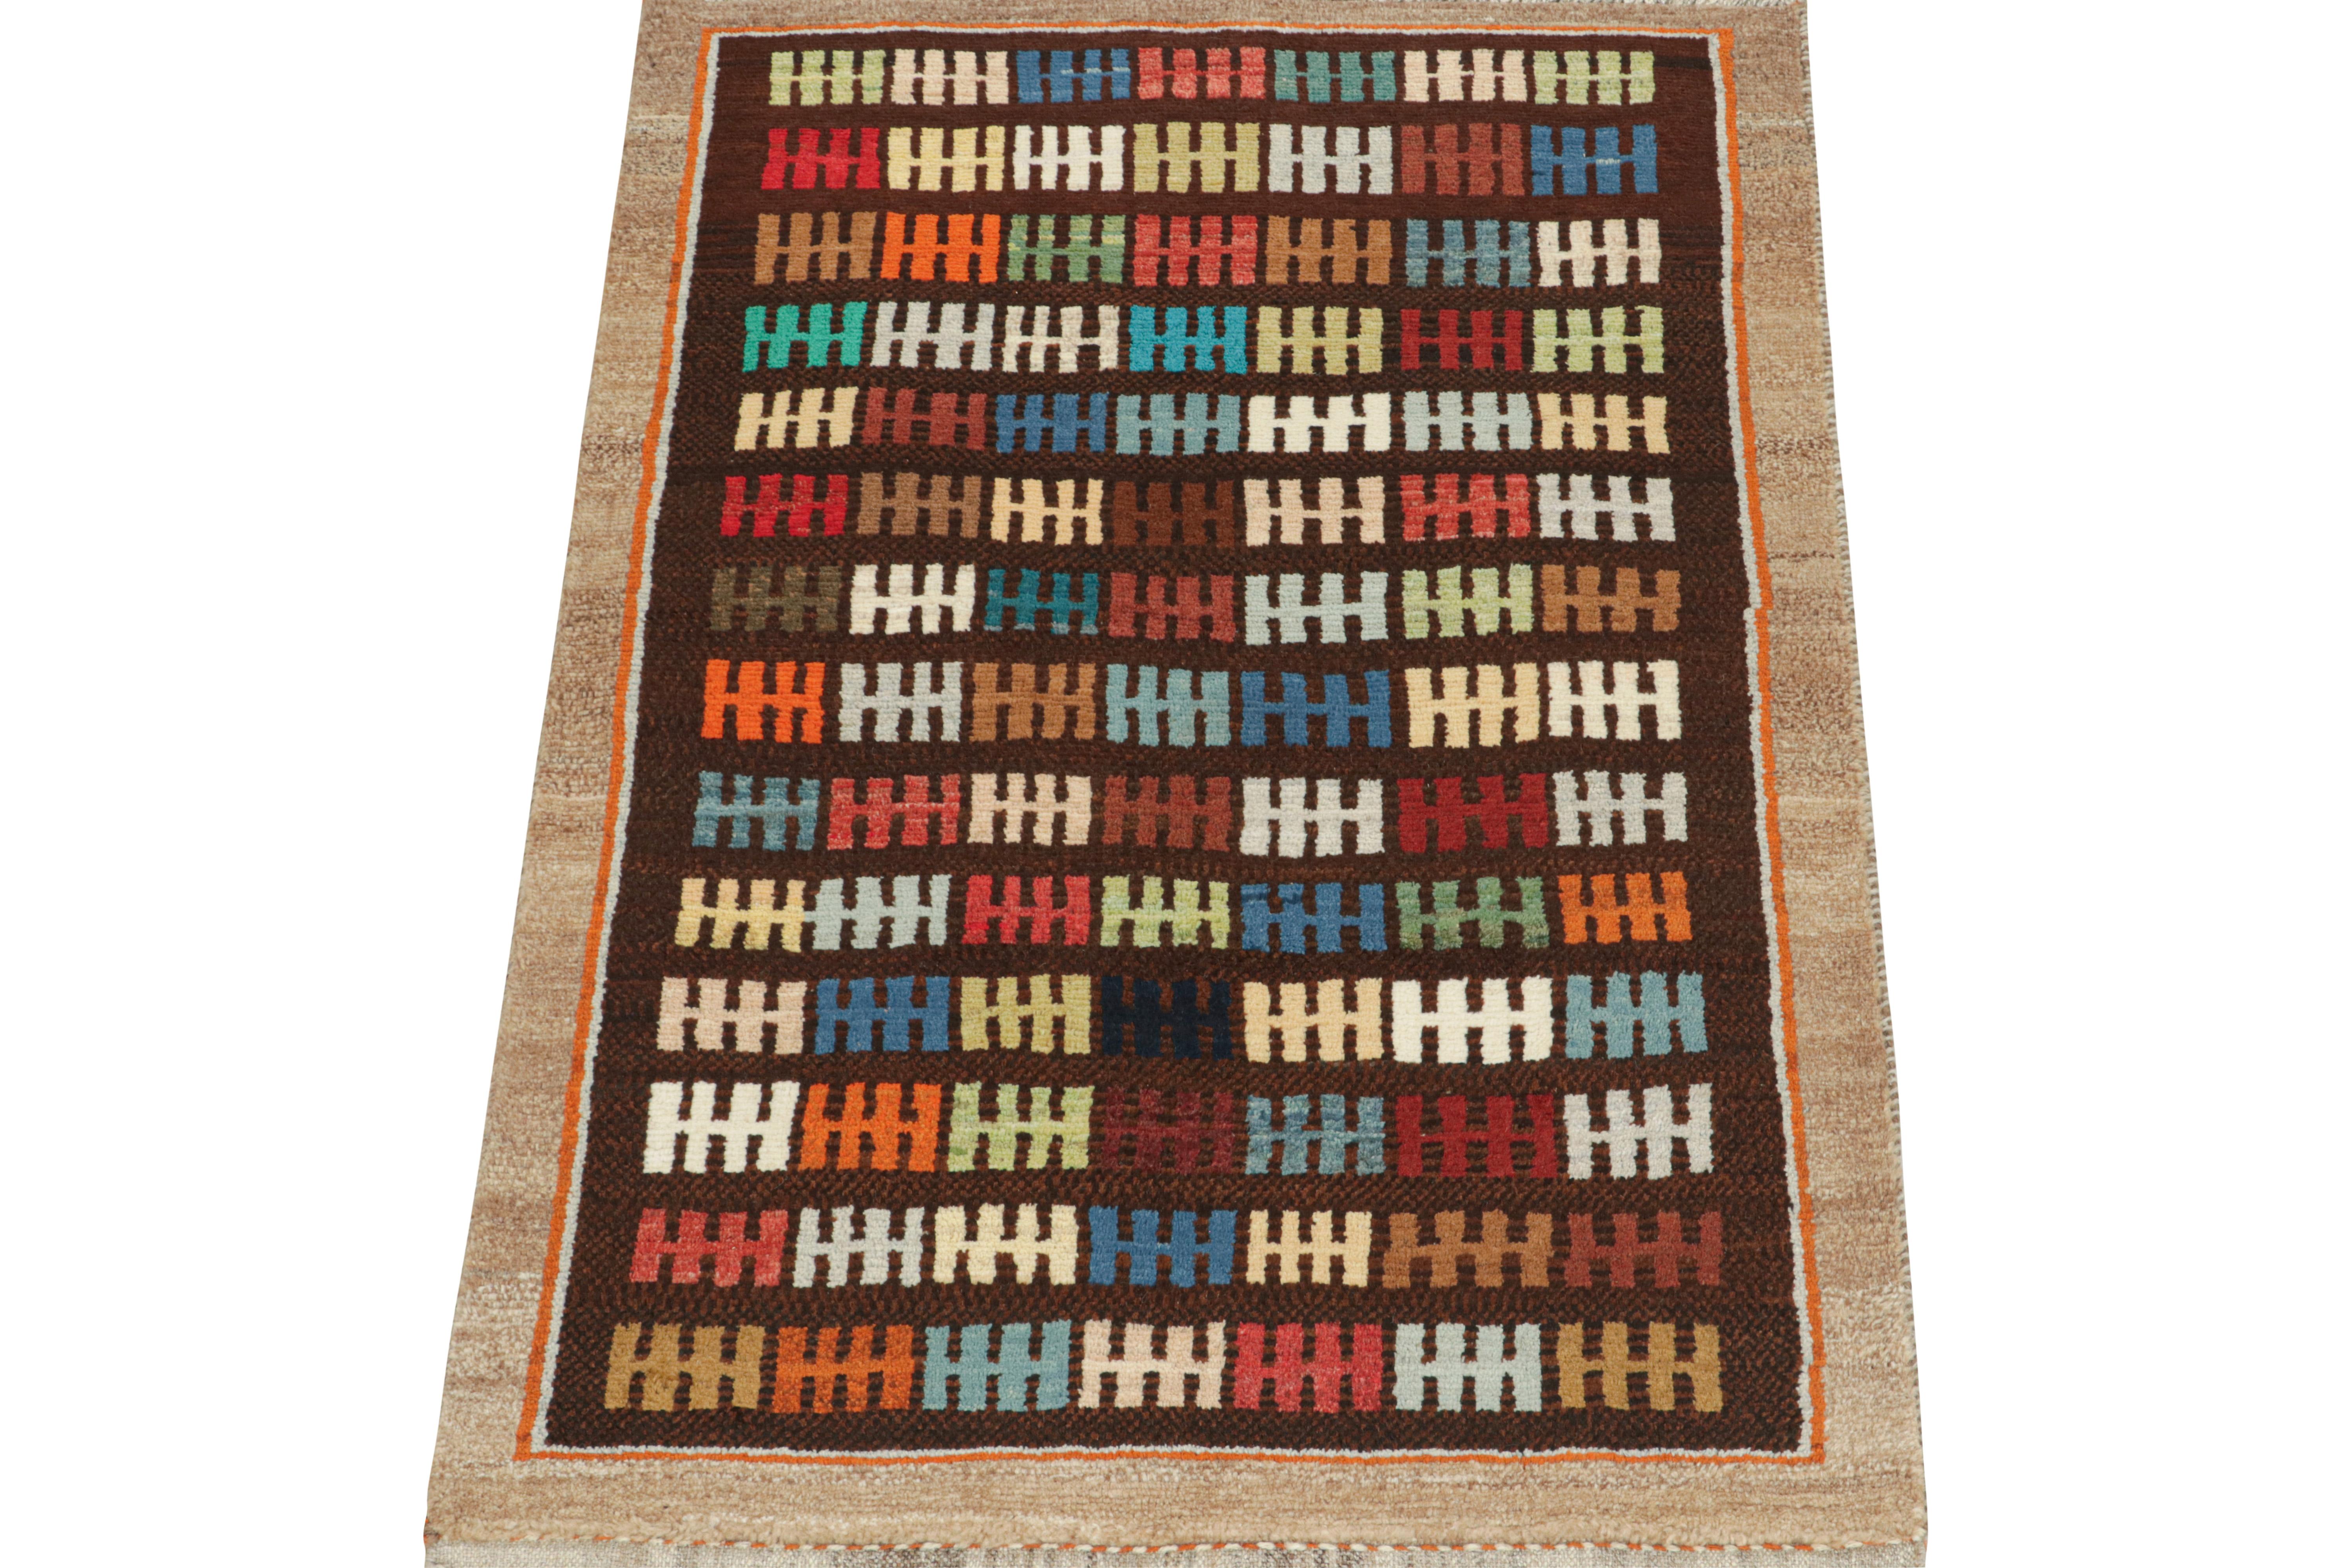 This vintage 3x5 Persian rug is a Gabbeh rug that originates from the Qashqai tribe—hand-knotted in wool circa 1950-1960.

Its repeat hosts a geometric pattern in vibrant colors atop a rich brown field and beige border. Though polychromatic, its